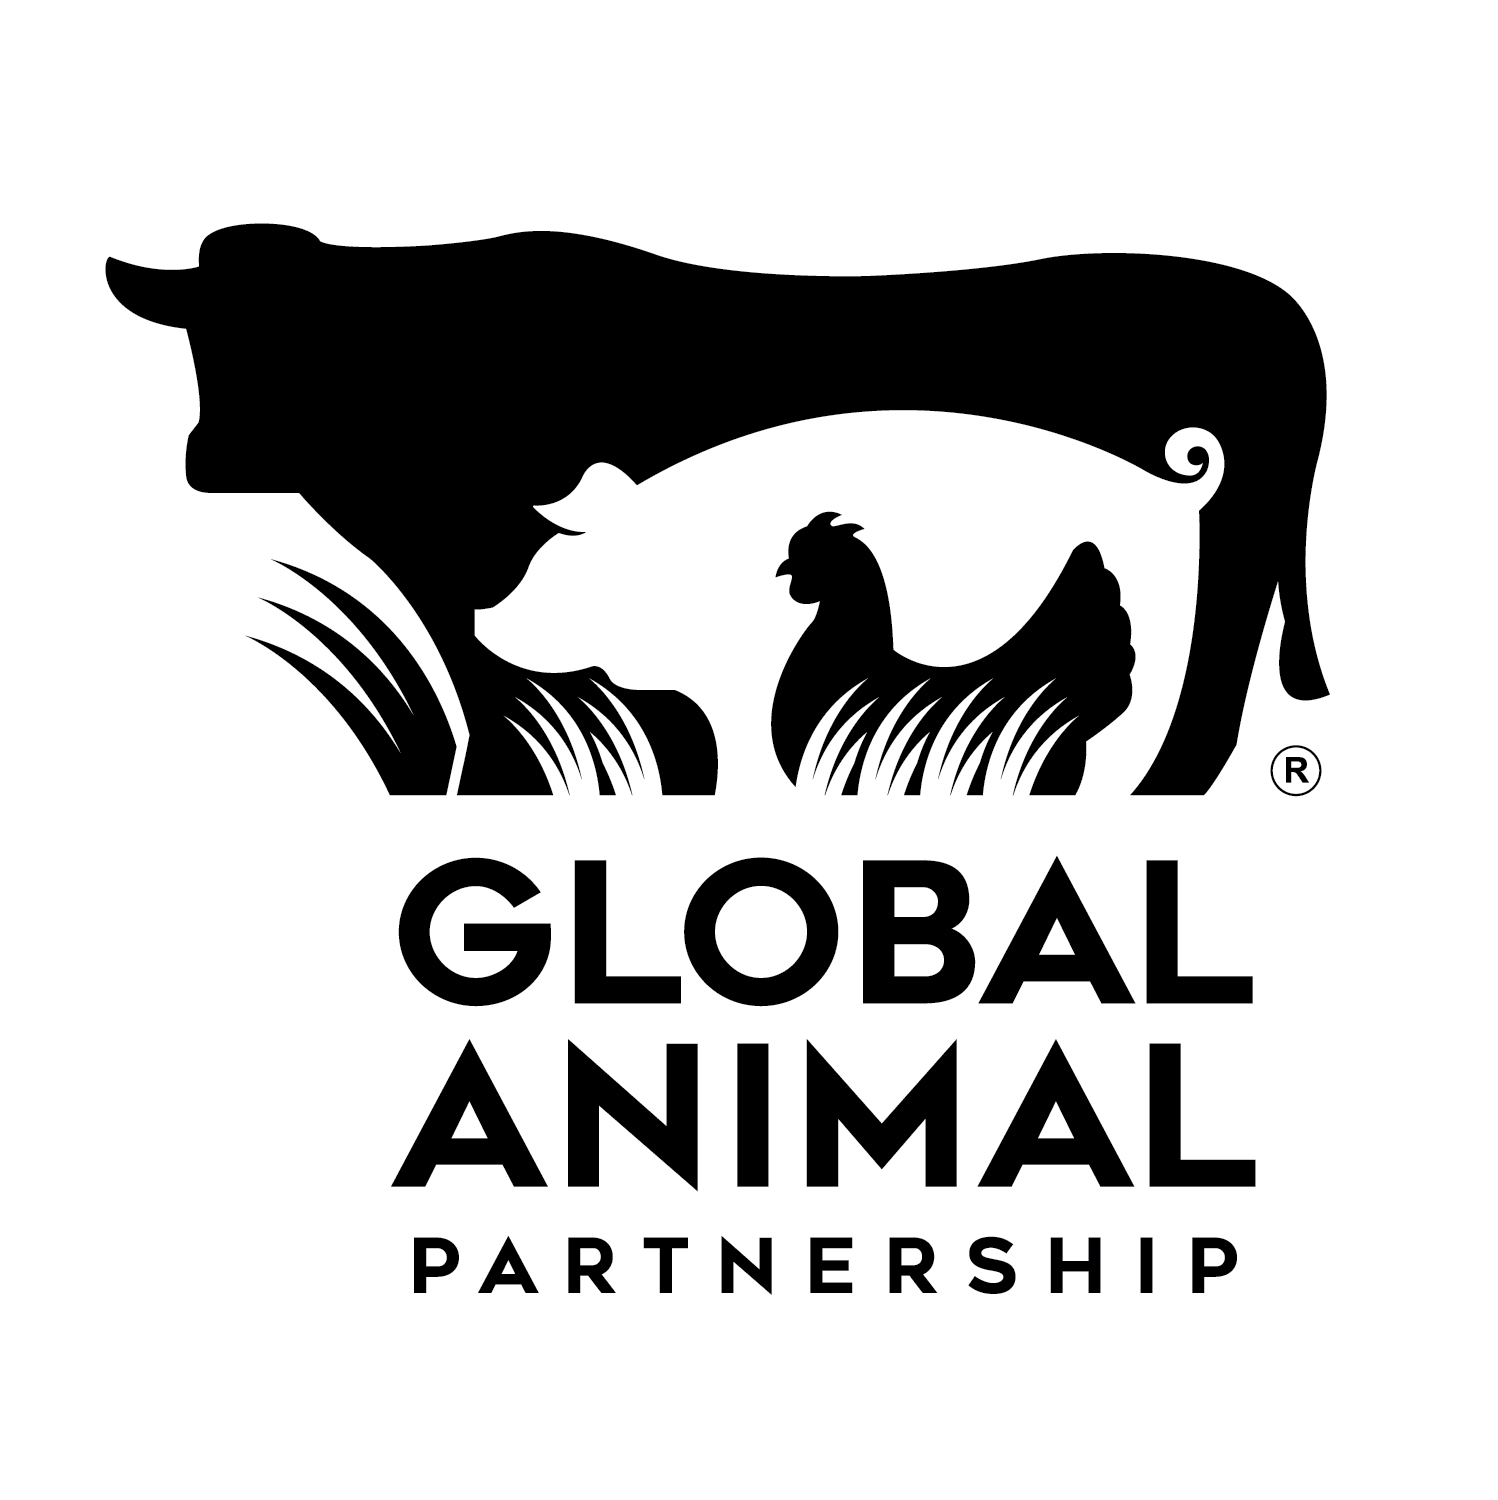 Global Animal Partnership Partners With HerdDogg, Launches Dairy Standard